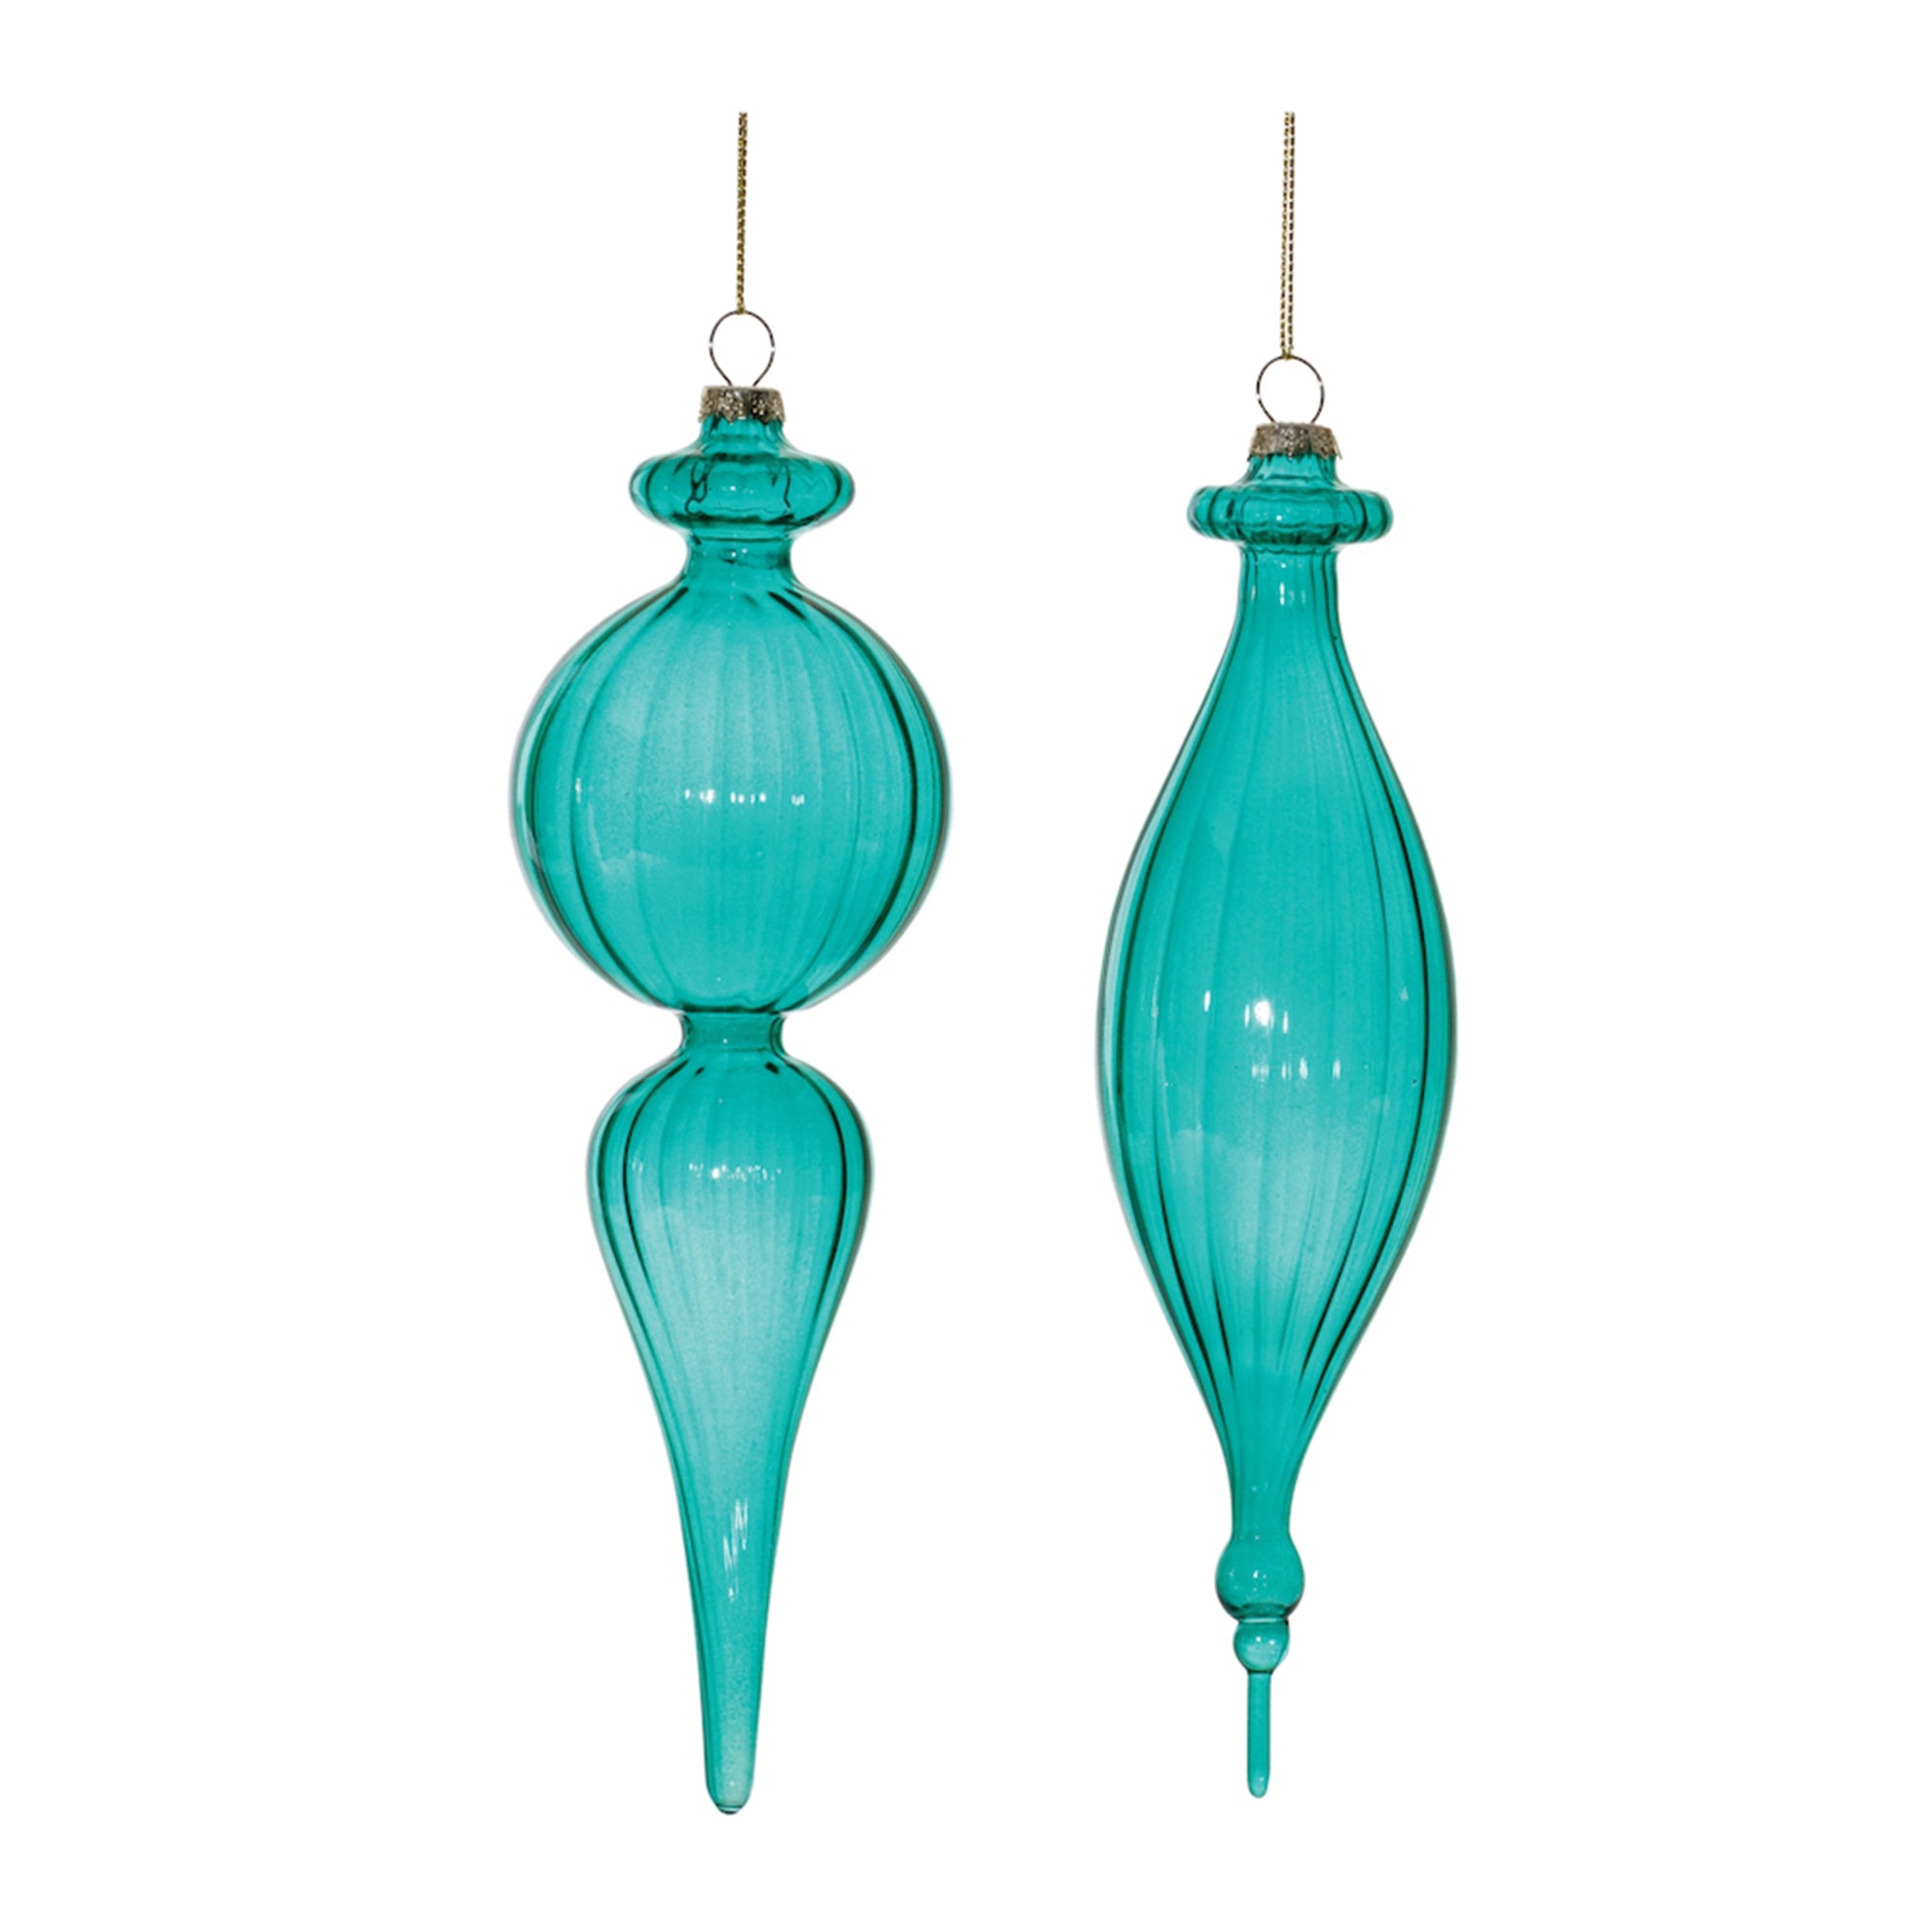 Blue Ribbed Glass Finial Drop Ornament (Set of 6)